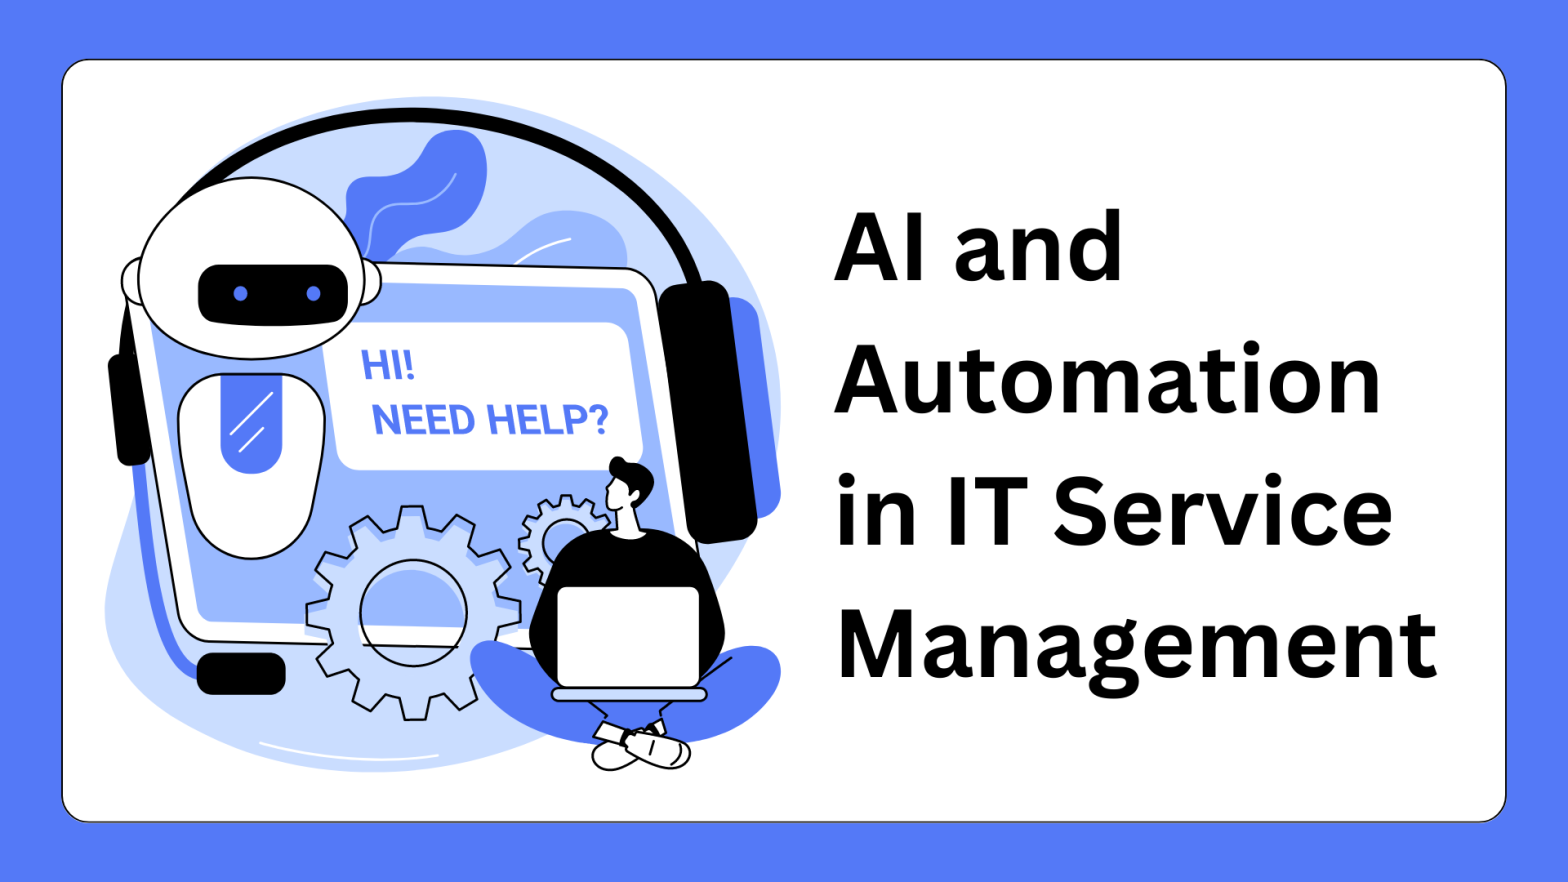 AI and Automation in IT Service Management